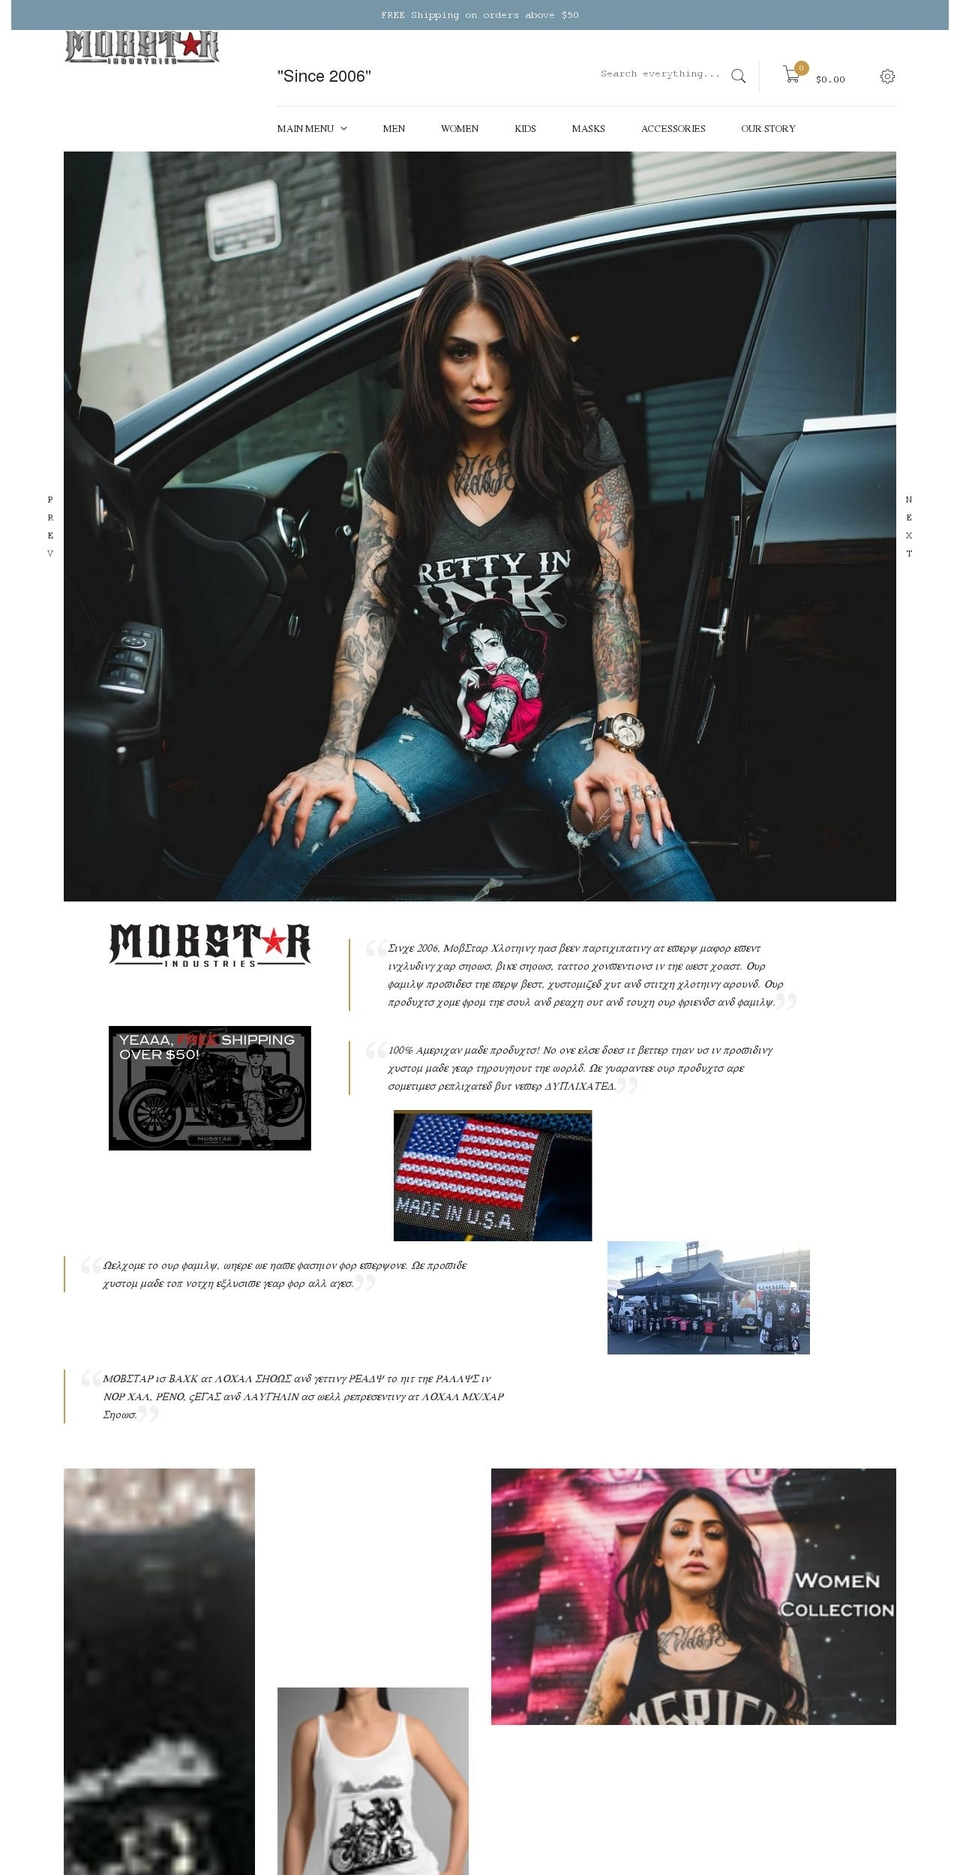 boutique Shopify theme site example mobstarindustries.com